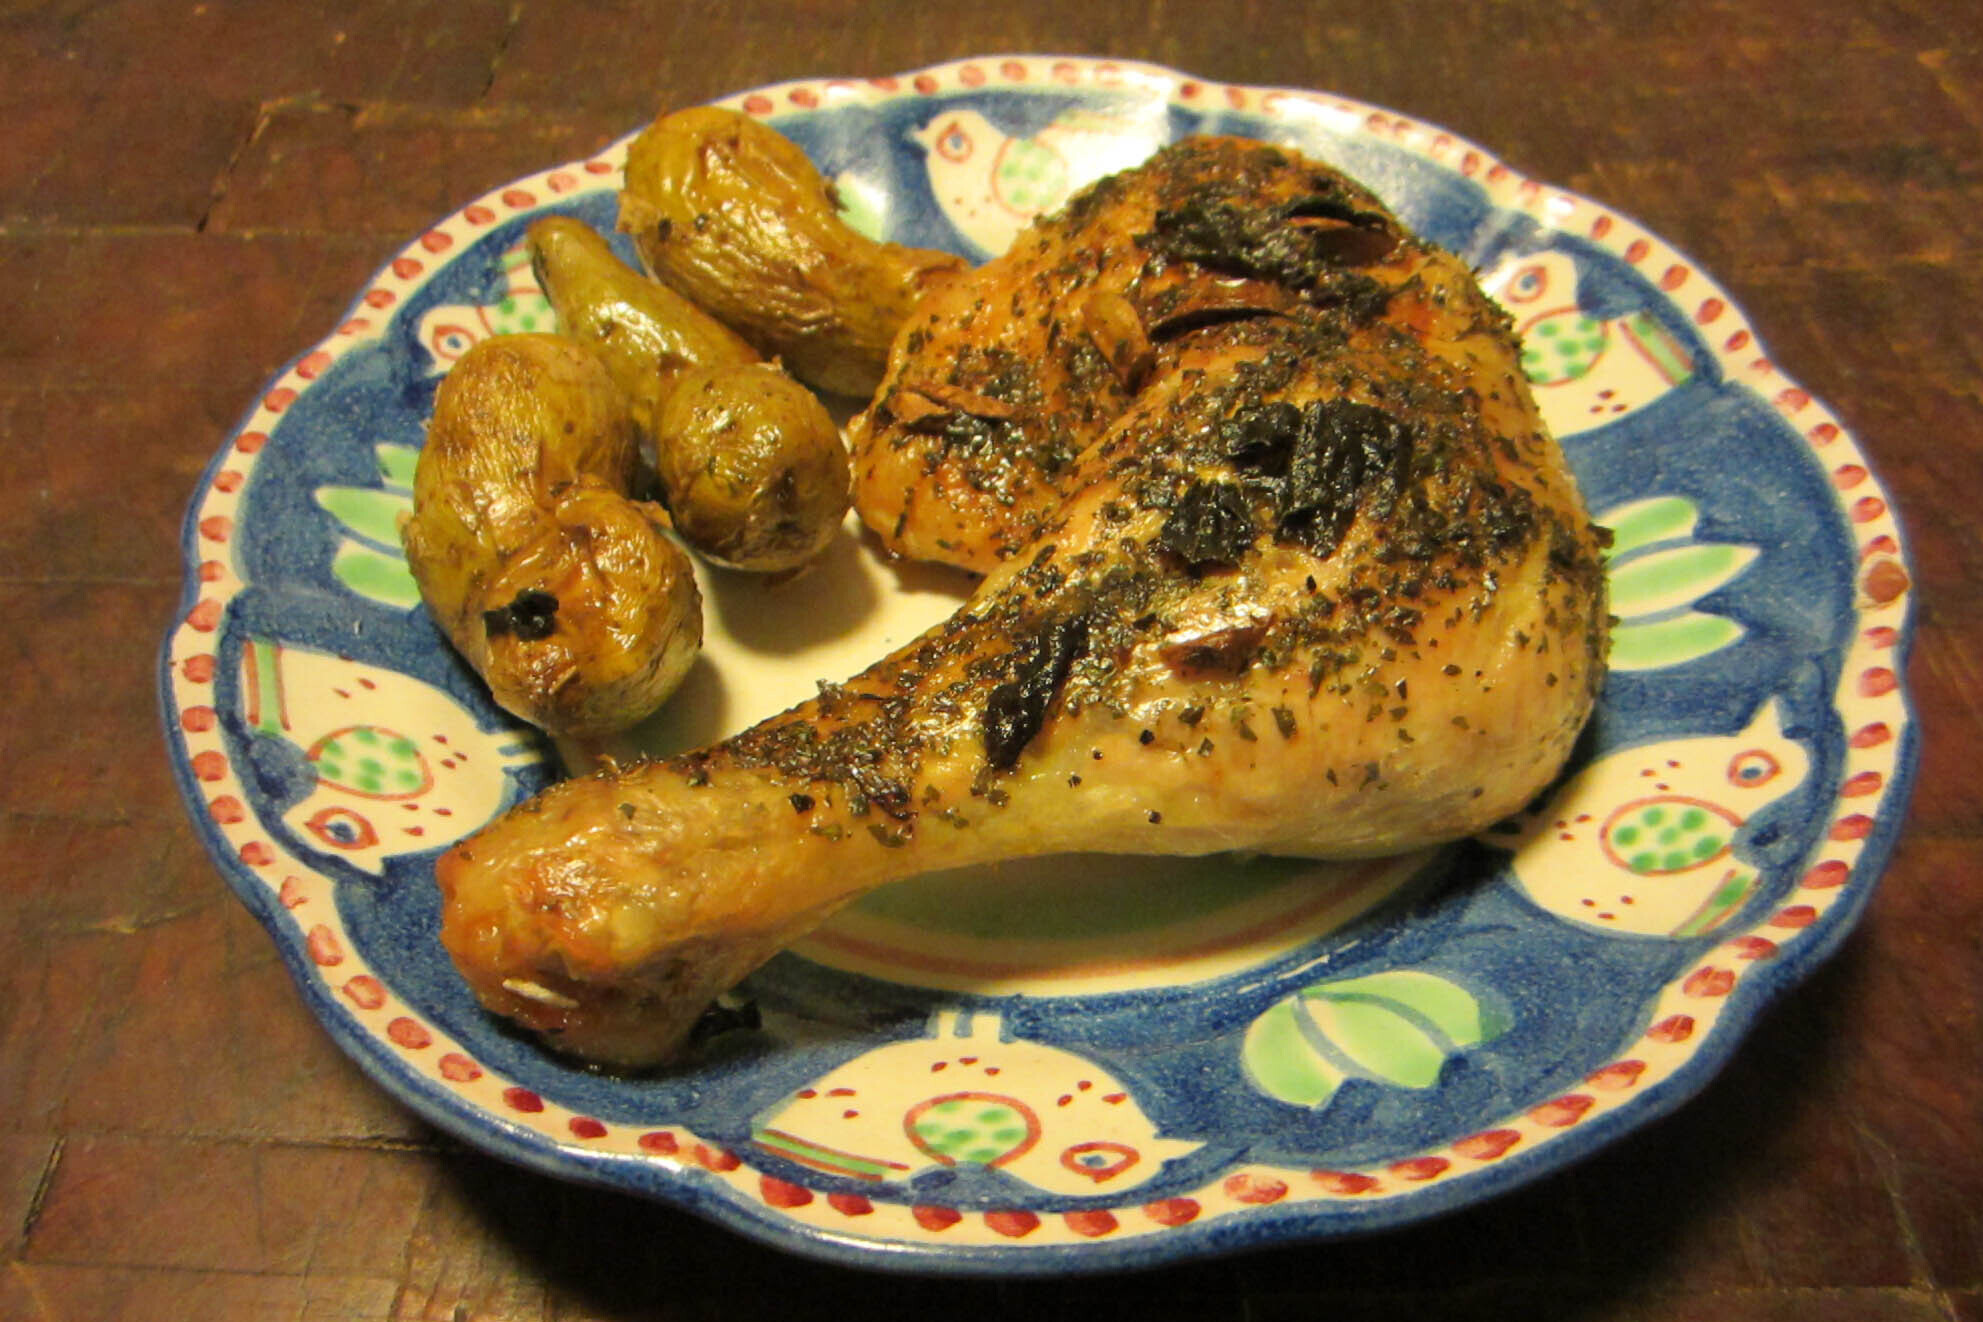 Plate of garlic herb chicken with potatoes